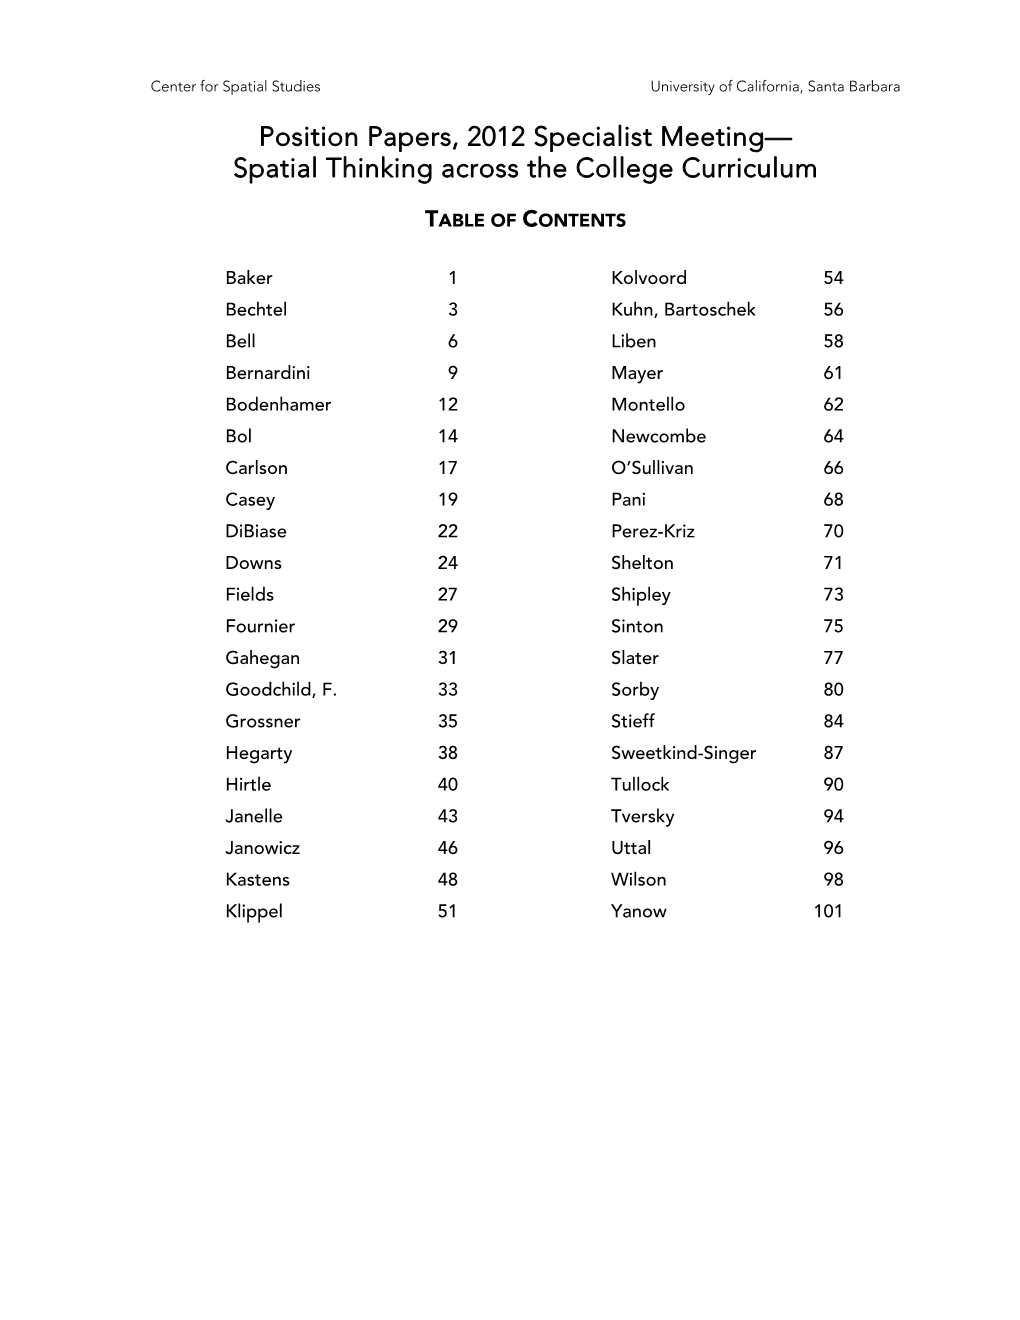 Spatial Thinking Across the College Curriculum